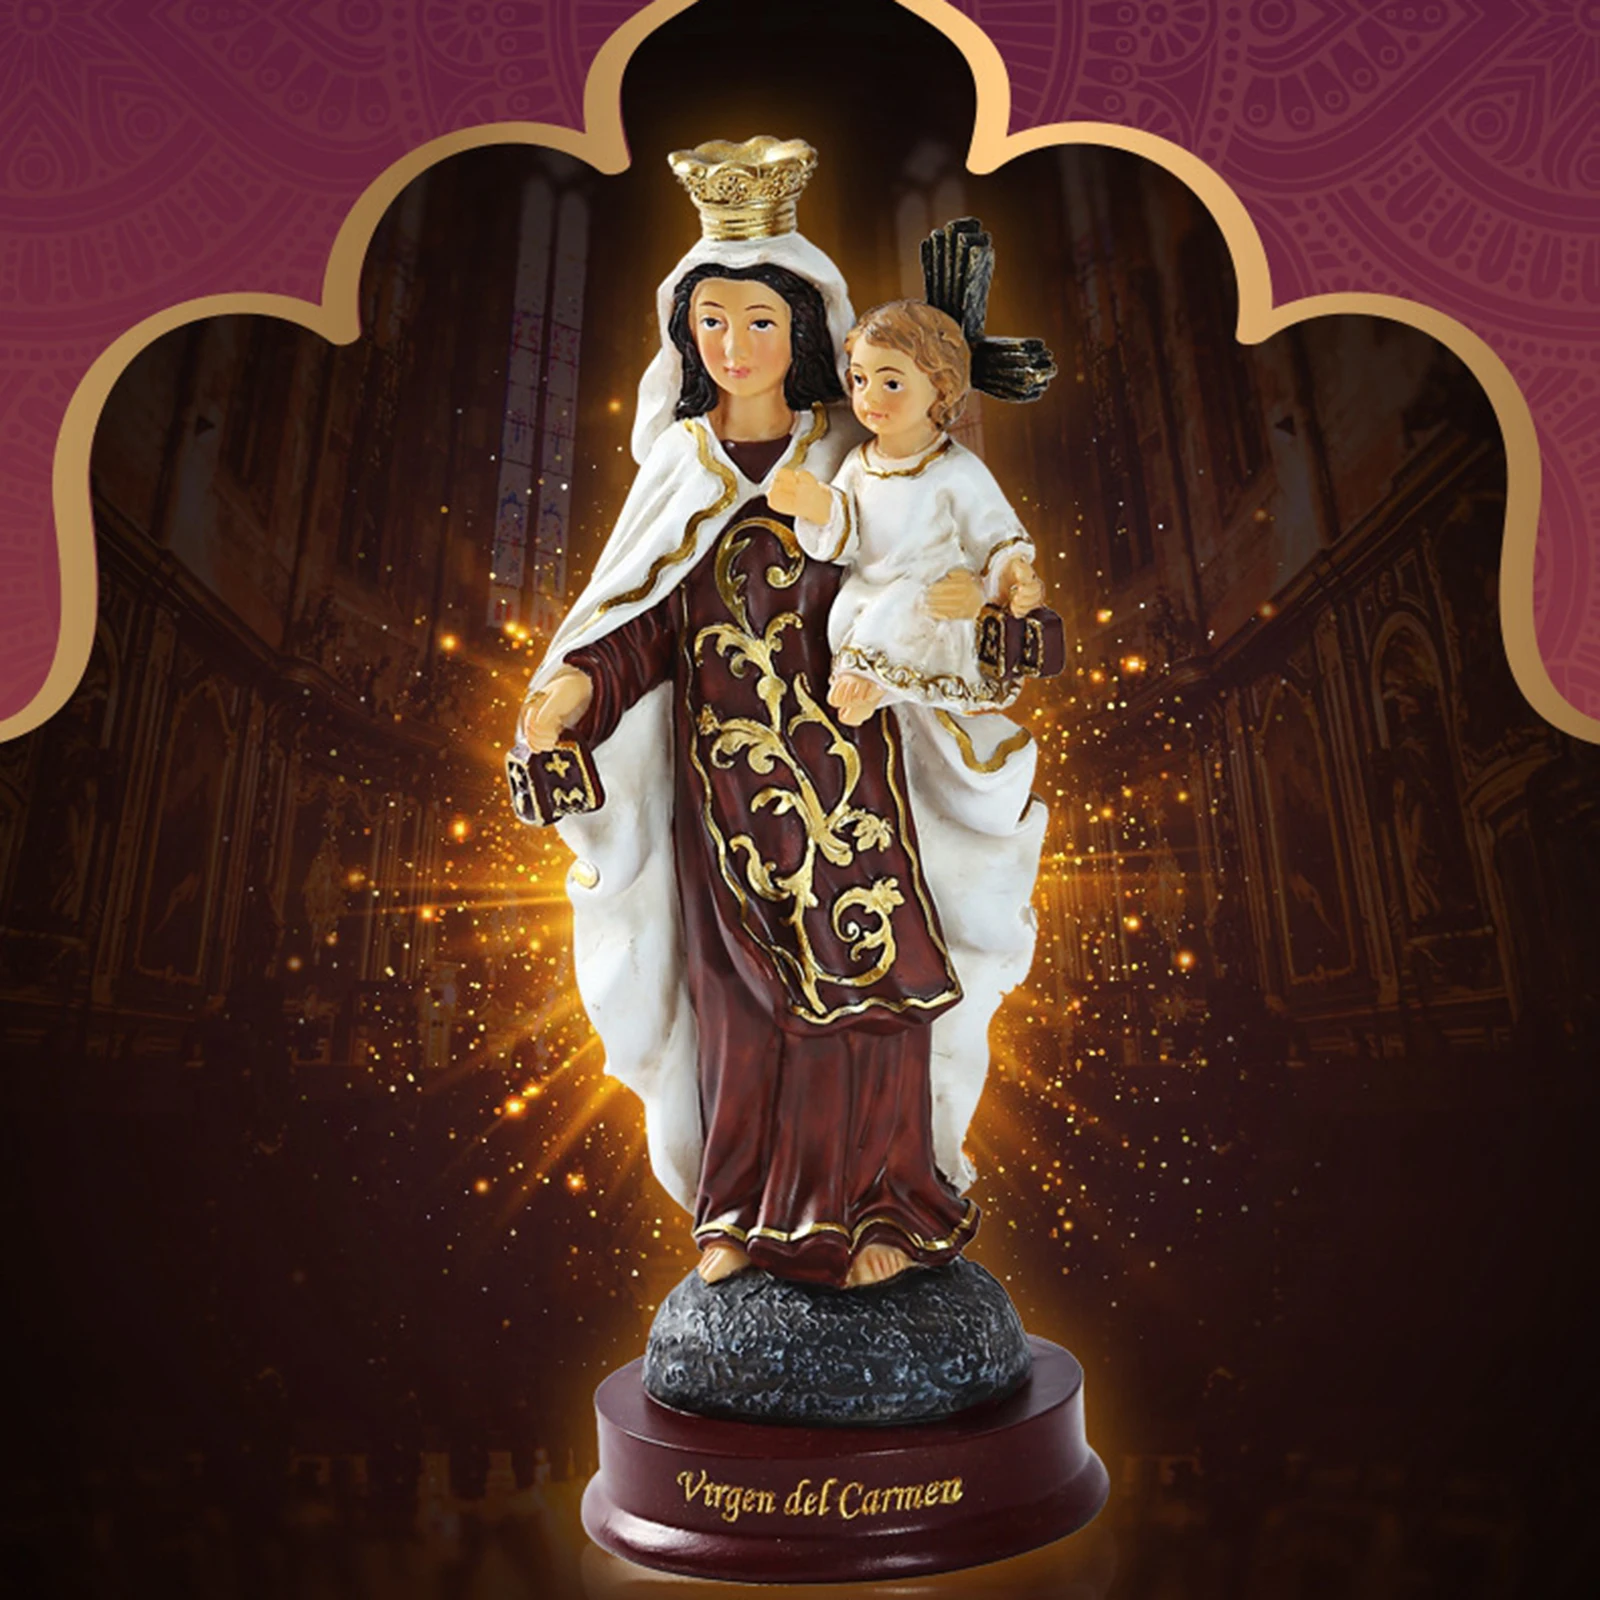 Exquisite Our Lady of Grace Virgin Mary Catholic Religious Statue Figurines